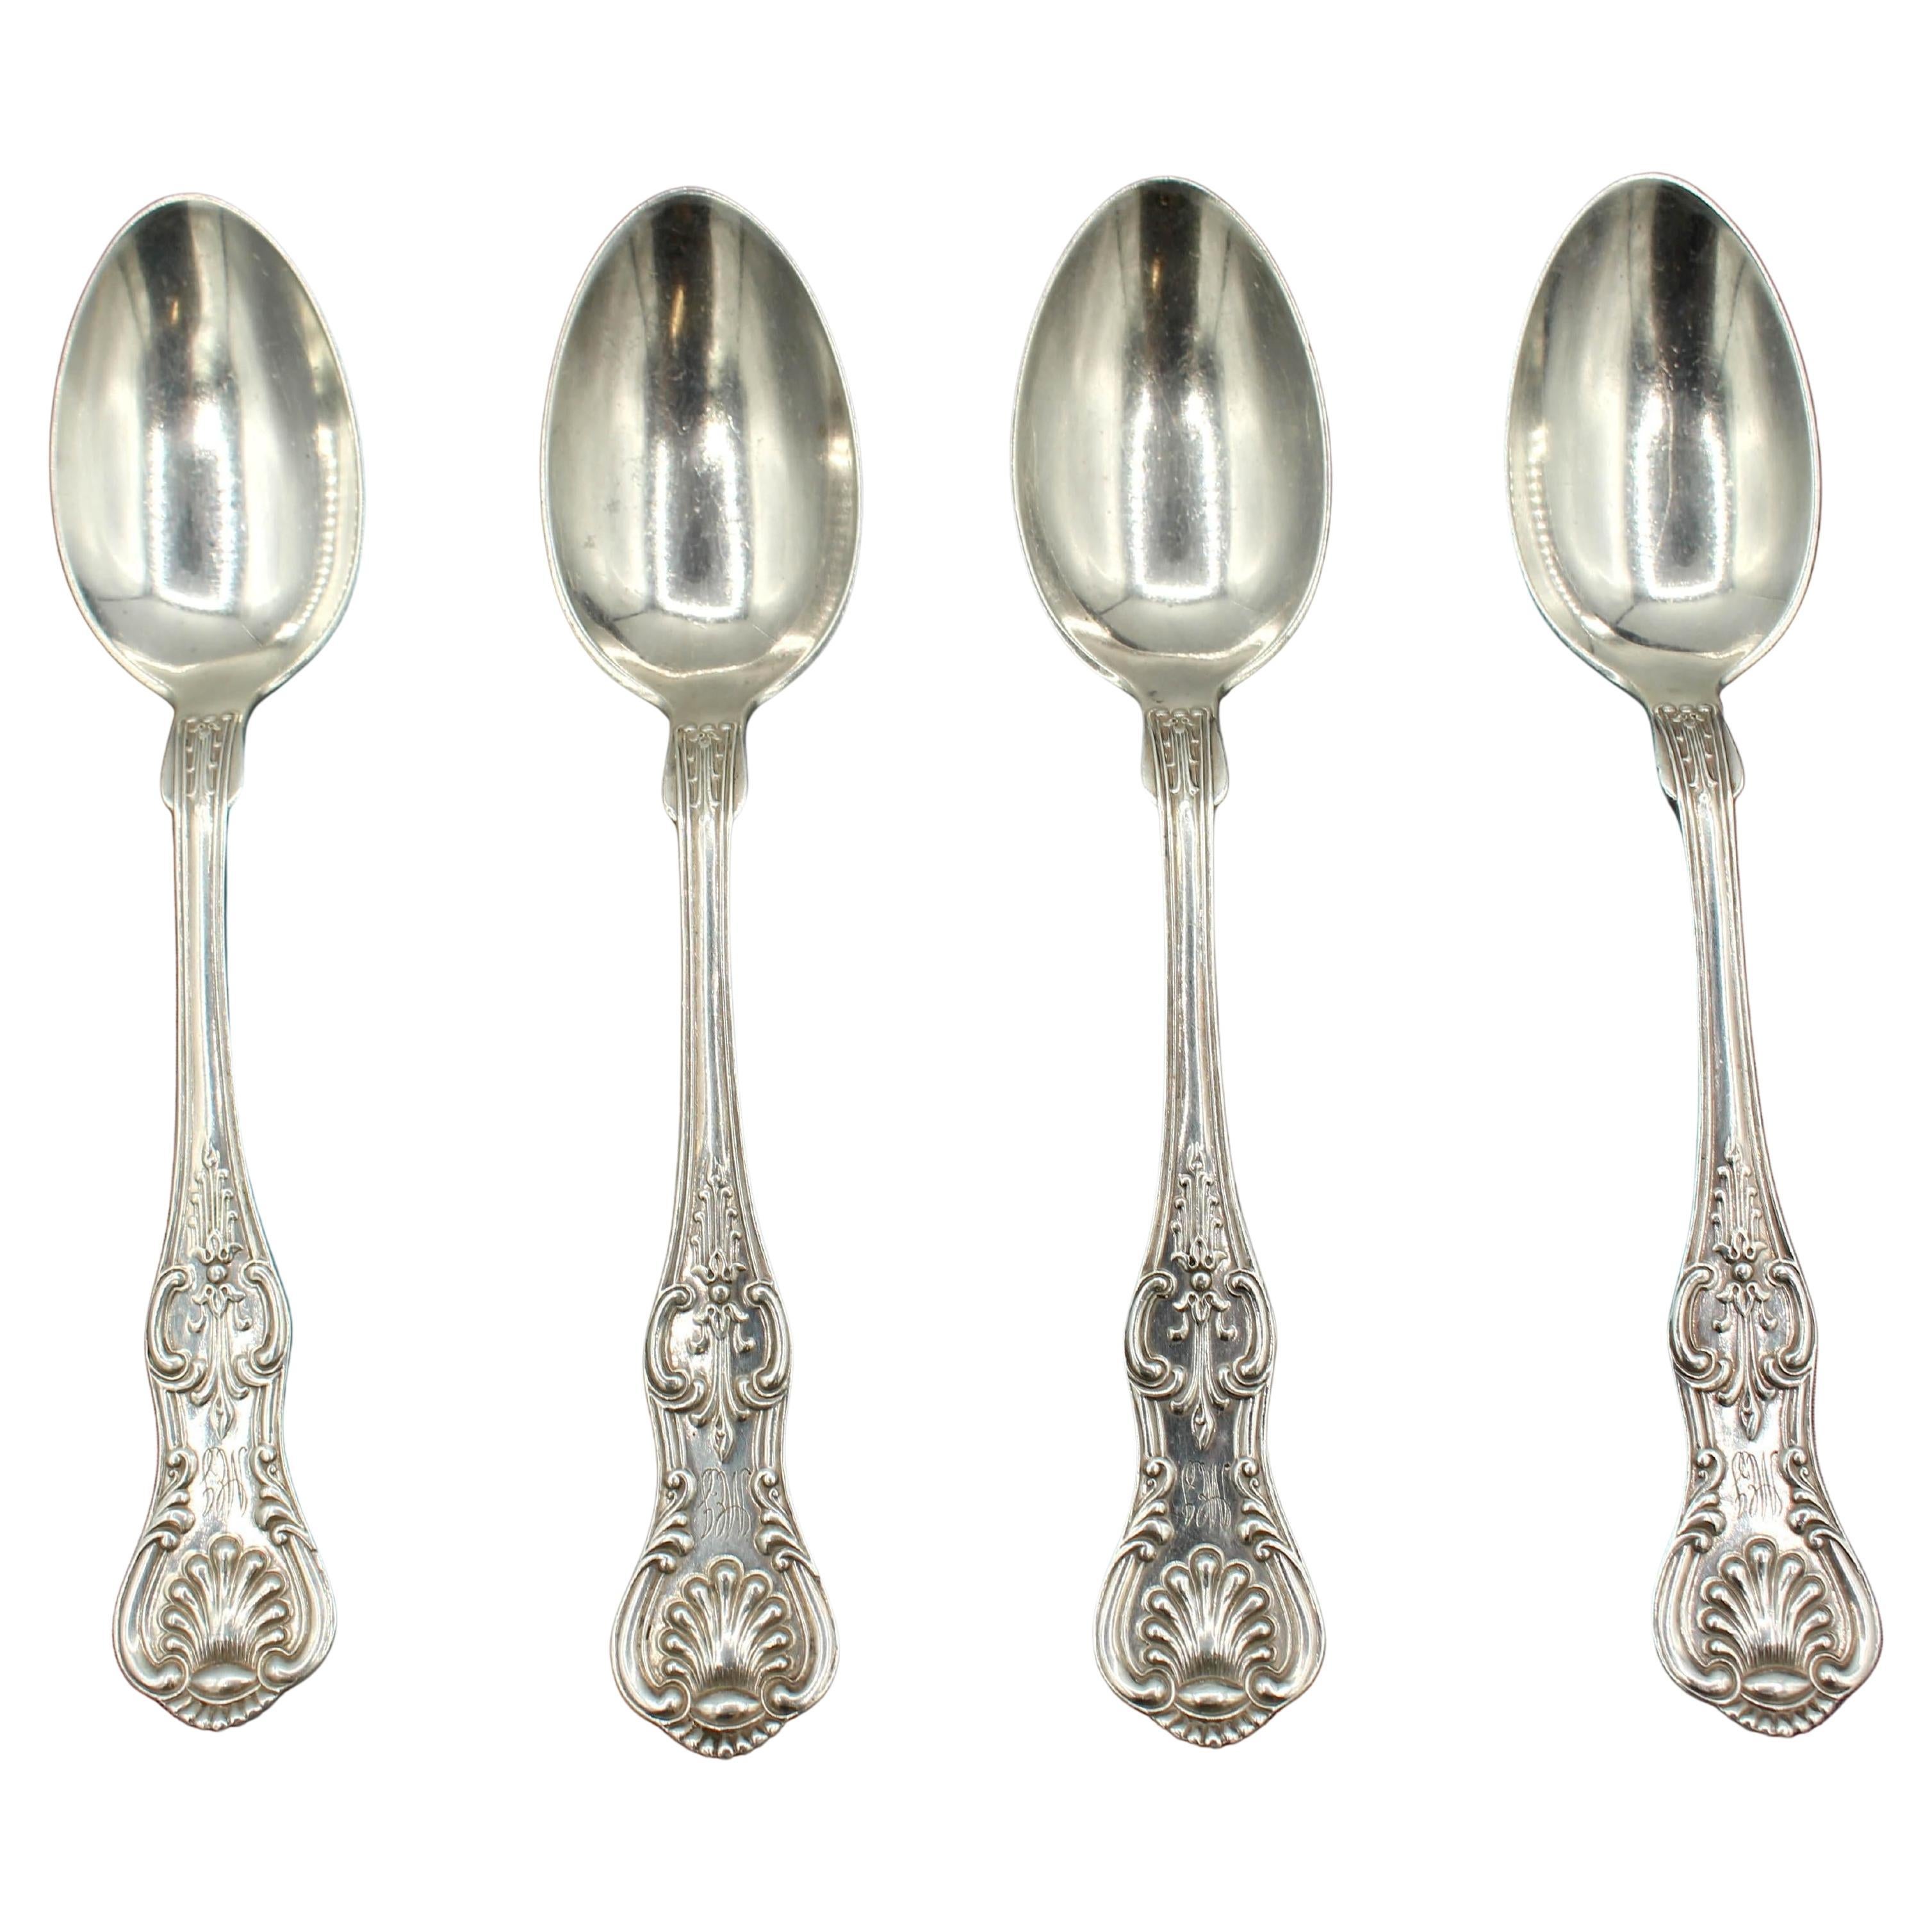 c. 1900 Set of Four Sterling Teaspoons by Dominick & Haff For Sale